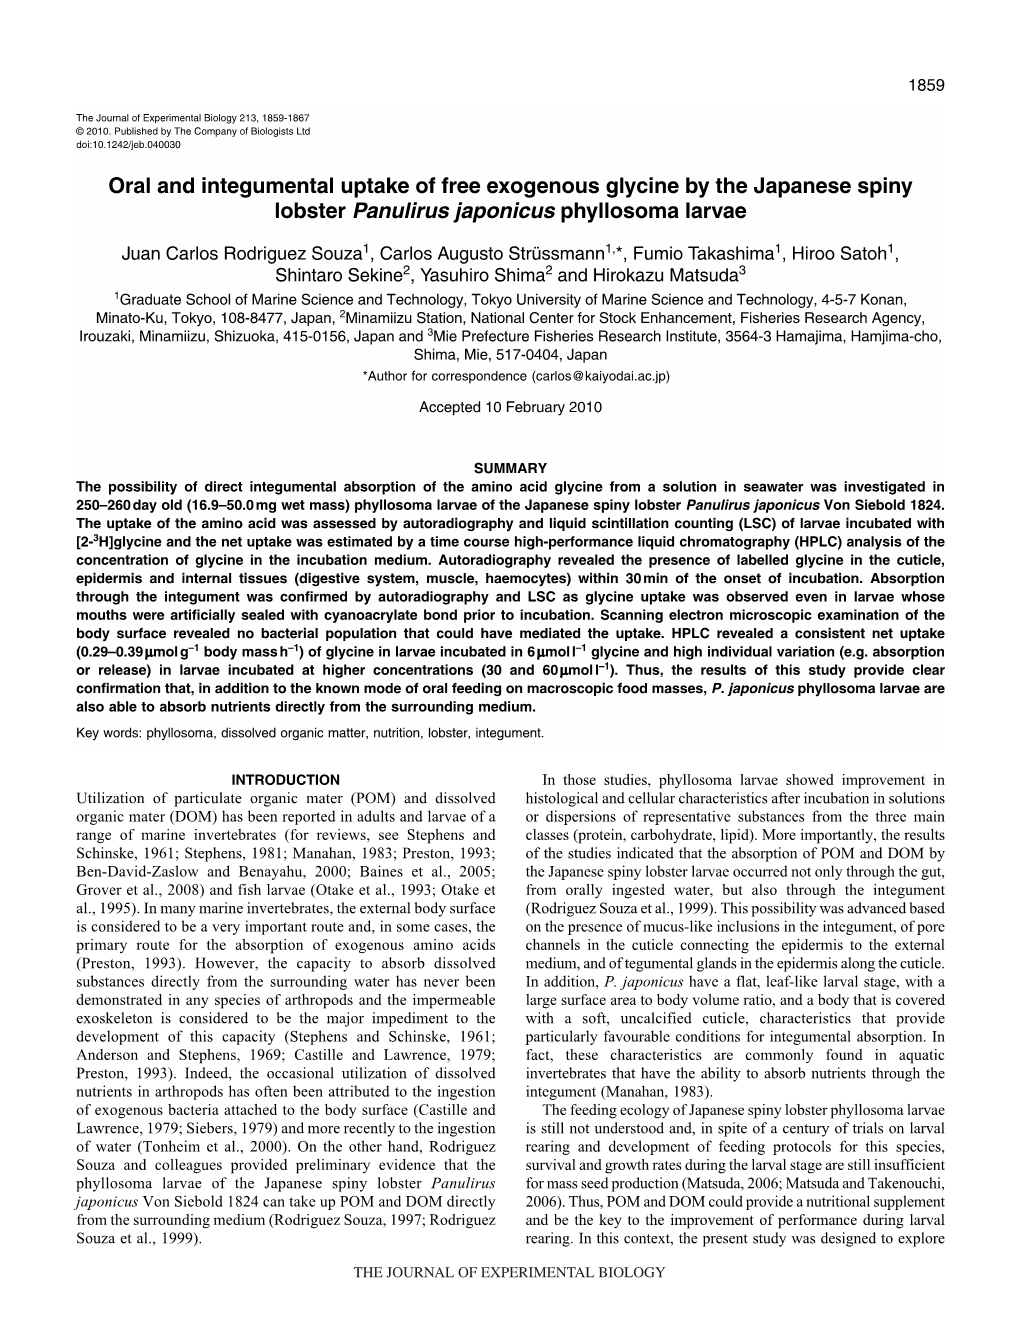 Oral and Integumental Uptake of Free Exogenous Glycine by the Japanese Spiny Lobster Panulirus Japonicus Phyllosoma Larvae